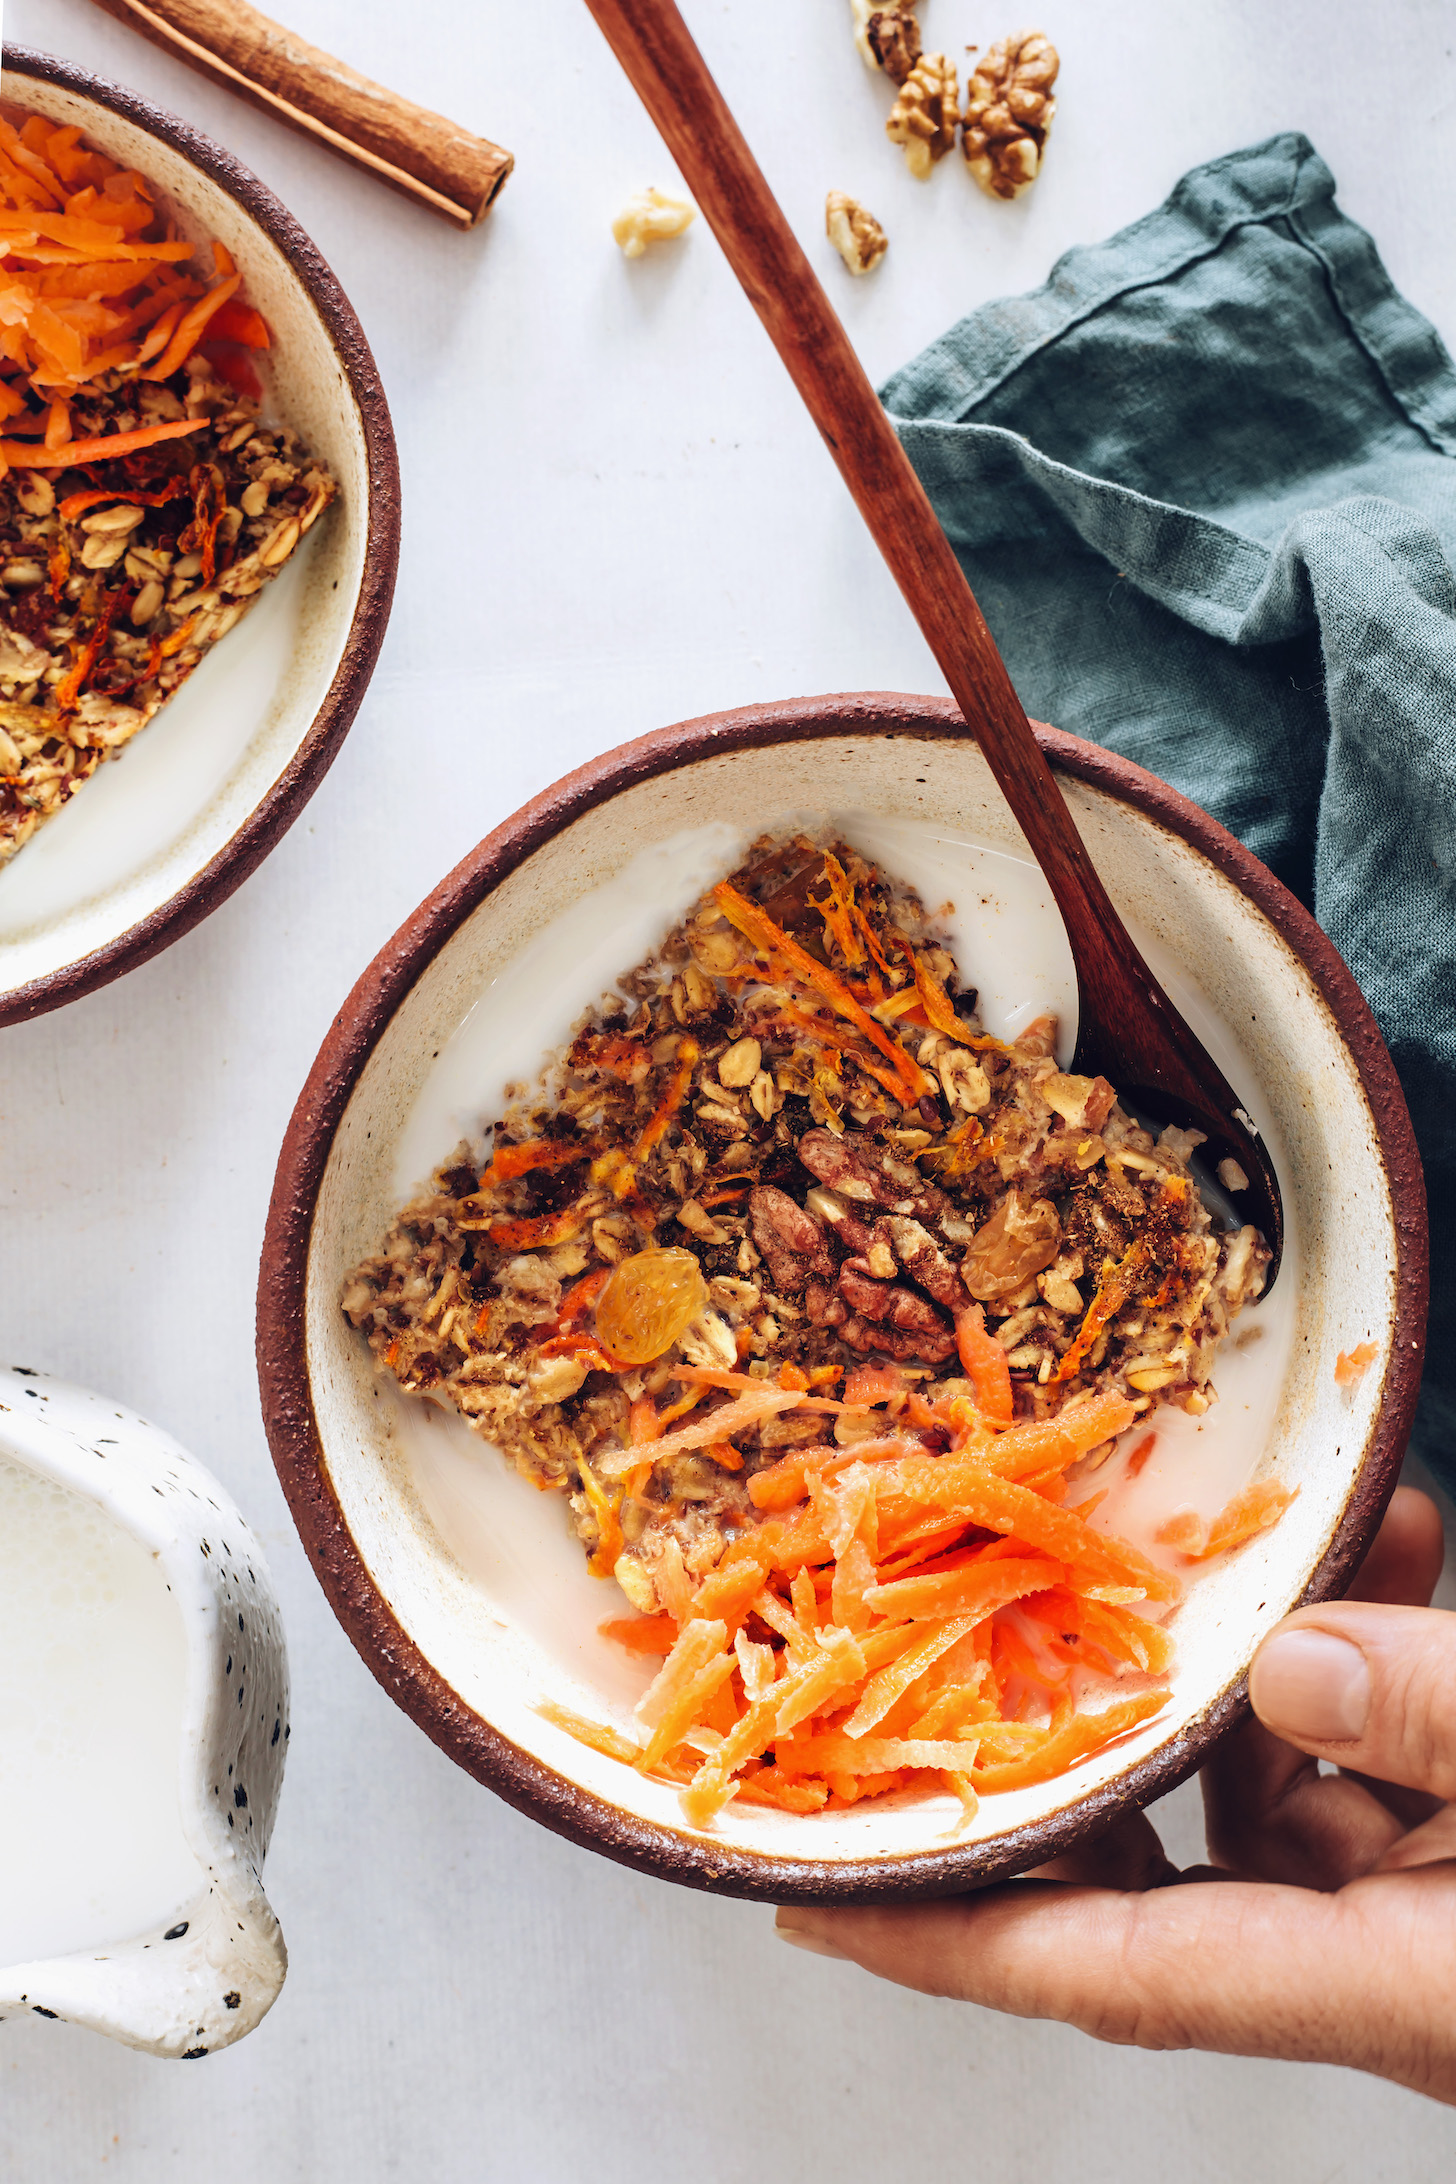 Bowls with slices of healthy baked oatmeal